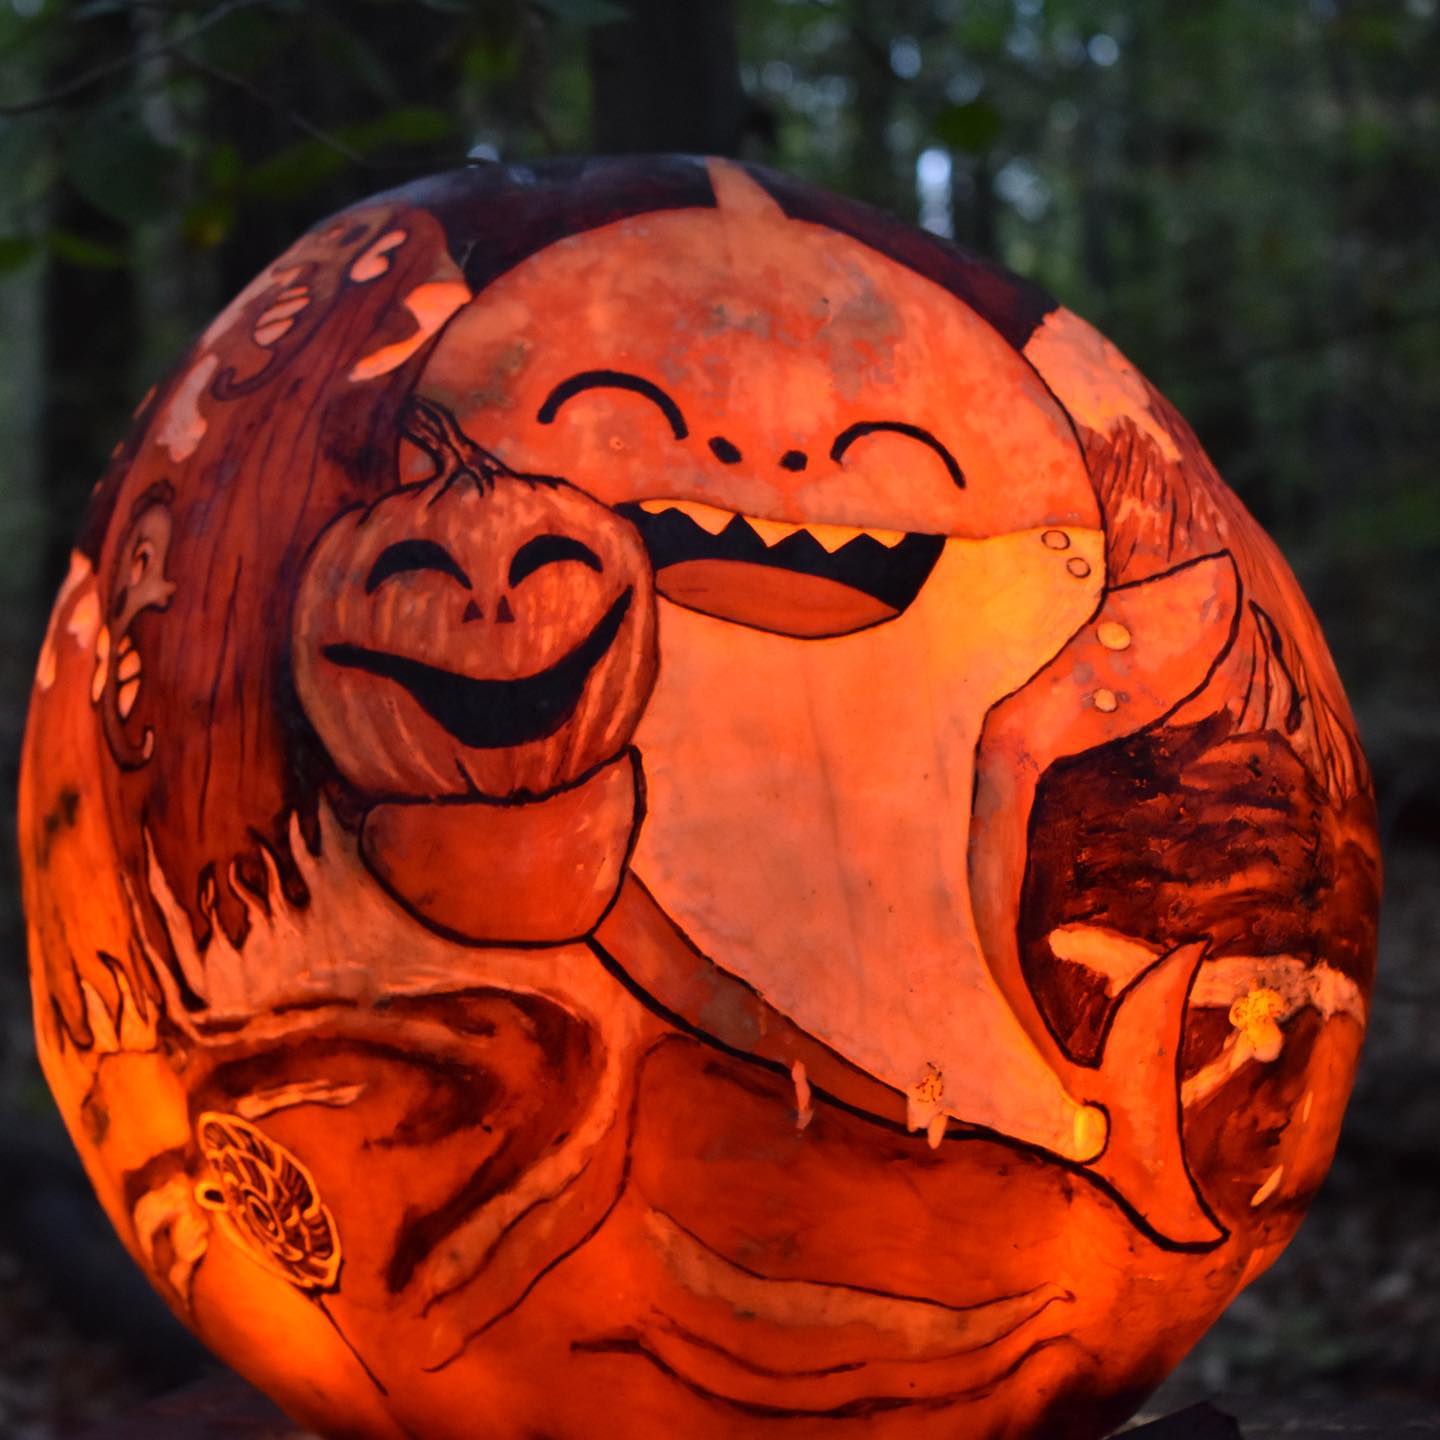 More than 5,000 jack-o-lanterns will shine this fall in ...